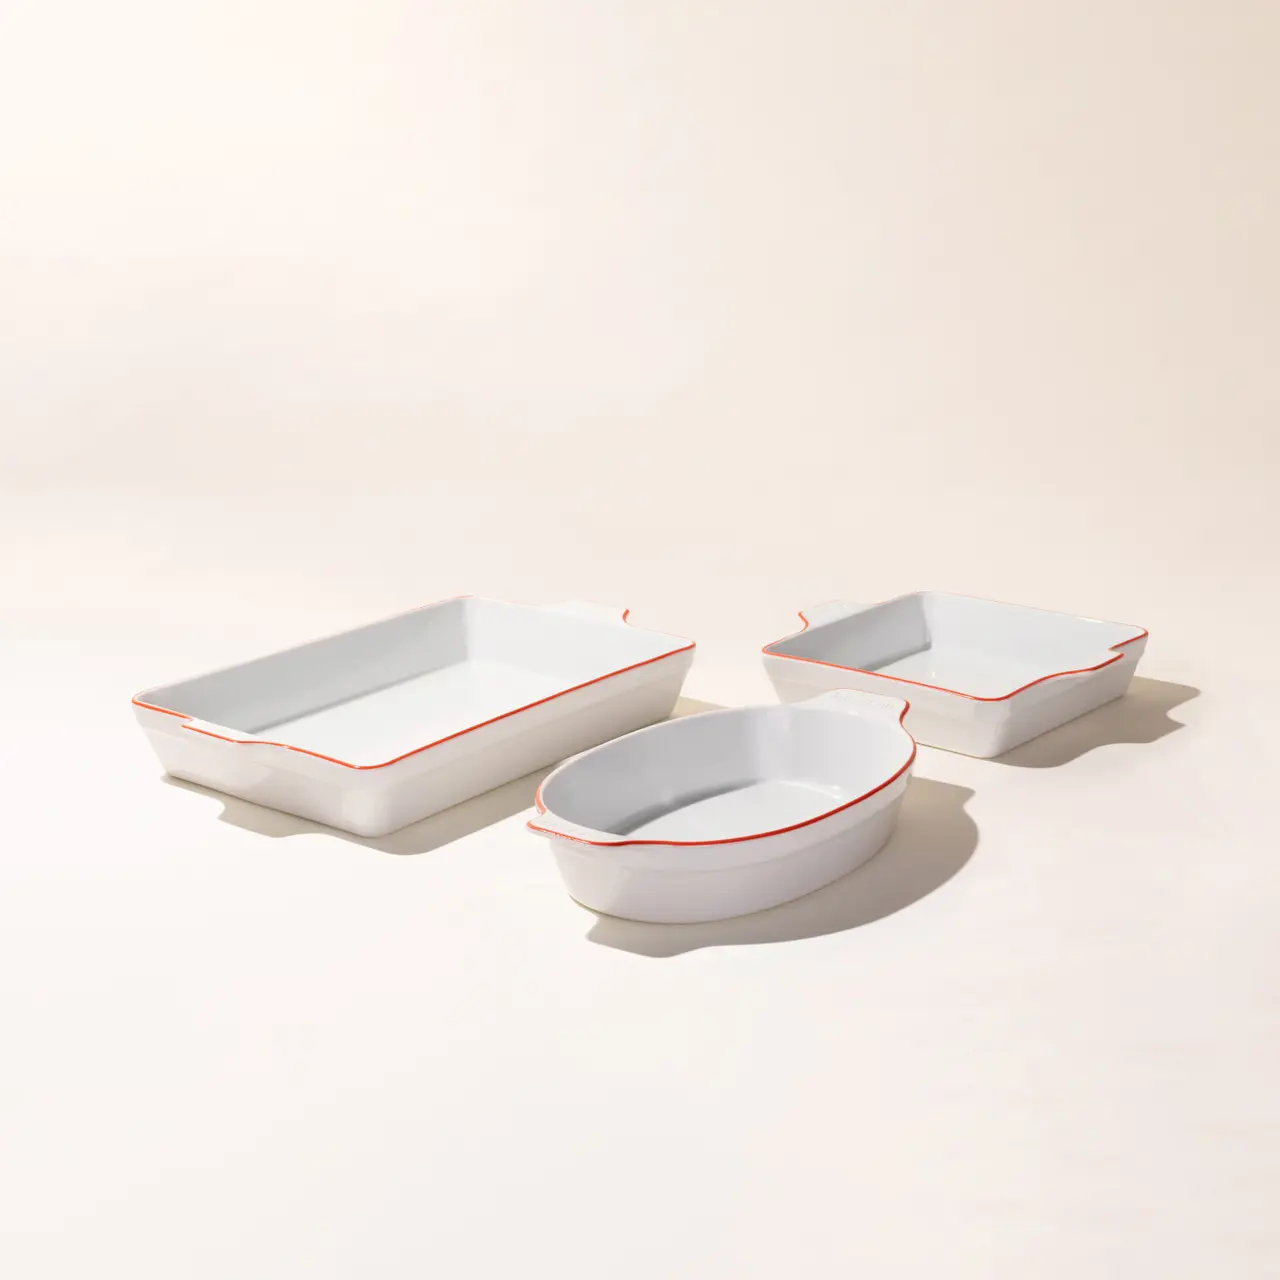 A set of three white ceramic dishes with red trim on a light background.